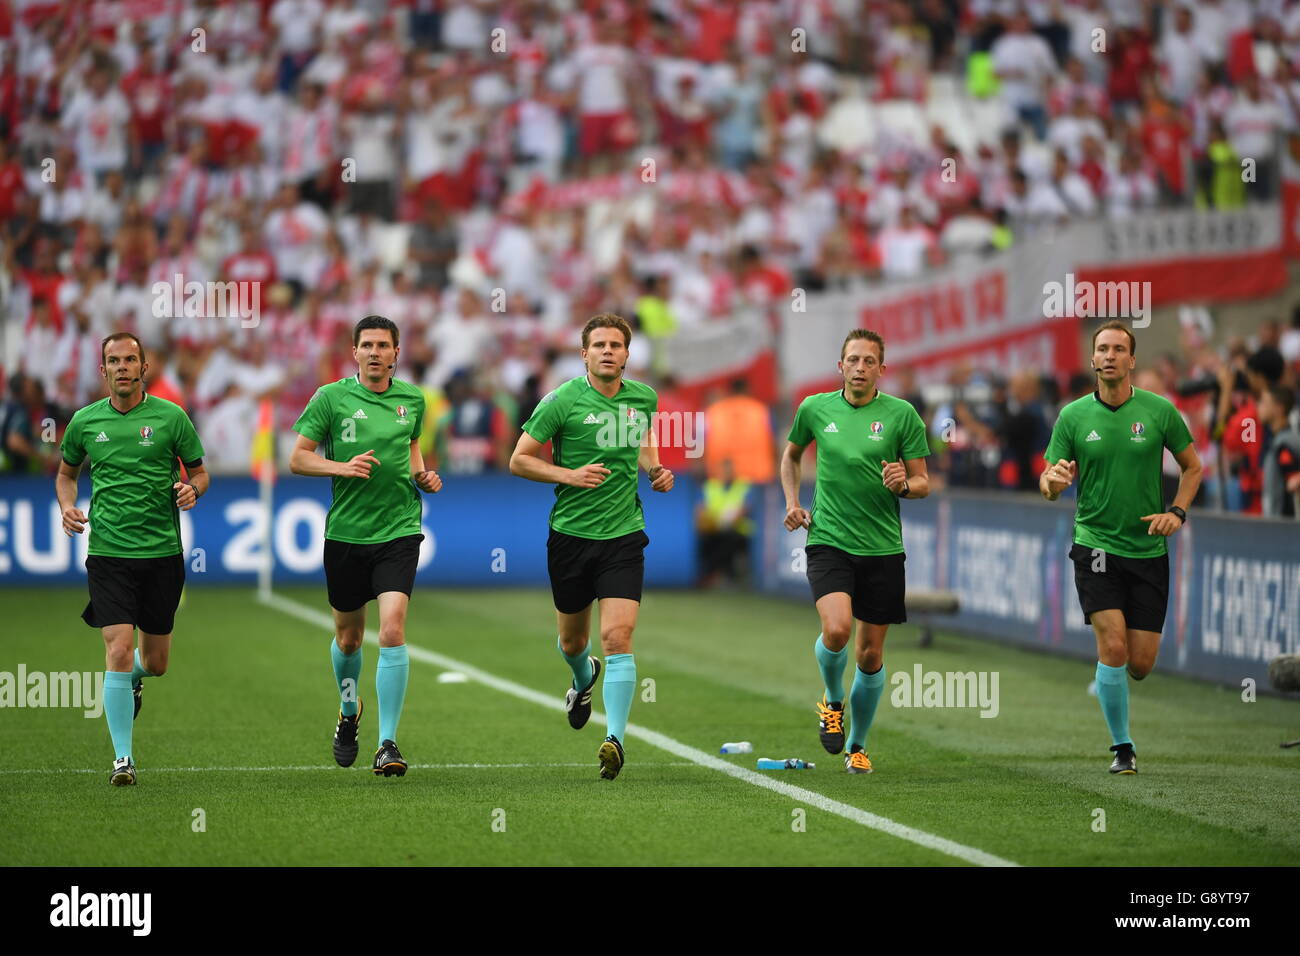 Marseille, France. 30th June, 2016. Referee Felix Brych of Germany (C) and his team, additional assistant referee Marco Fritz (L), assistant referee Stefan Lupp (2-L), assistant referee Mark Borsch (2-R), additional assistant referee Bastian Dankert (R) warm up before the UEFA EURO 2016 quarter final soccer match between Poland and Portugal at the Stade Velodrome in Marseille, France, 30 June 2016. Photo: Federico Gambarini/dpa/Alamy Live News Stock Photo